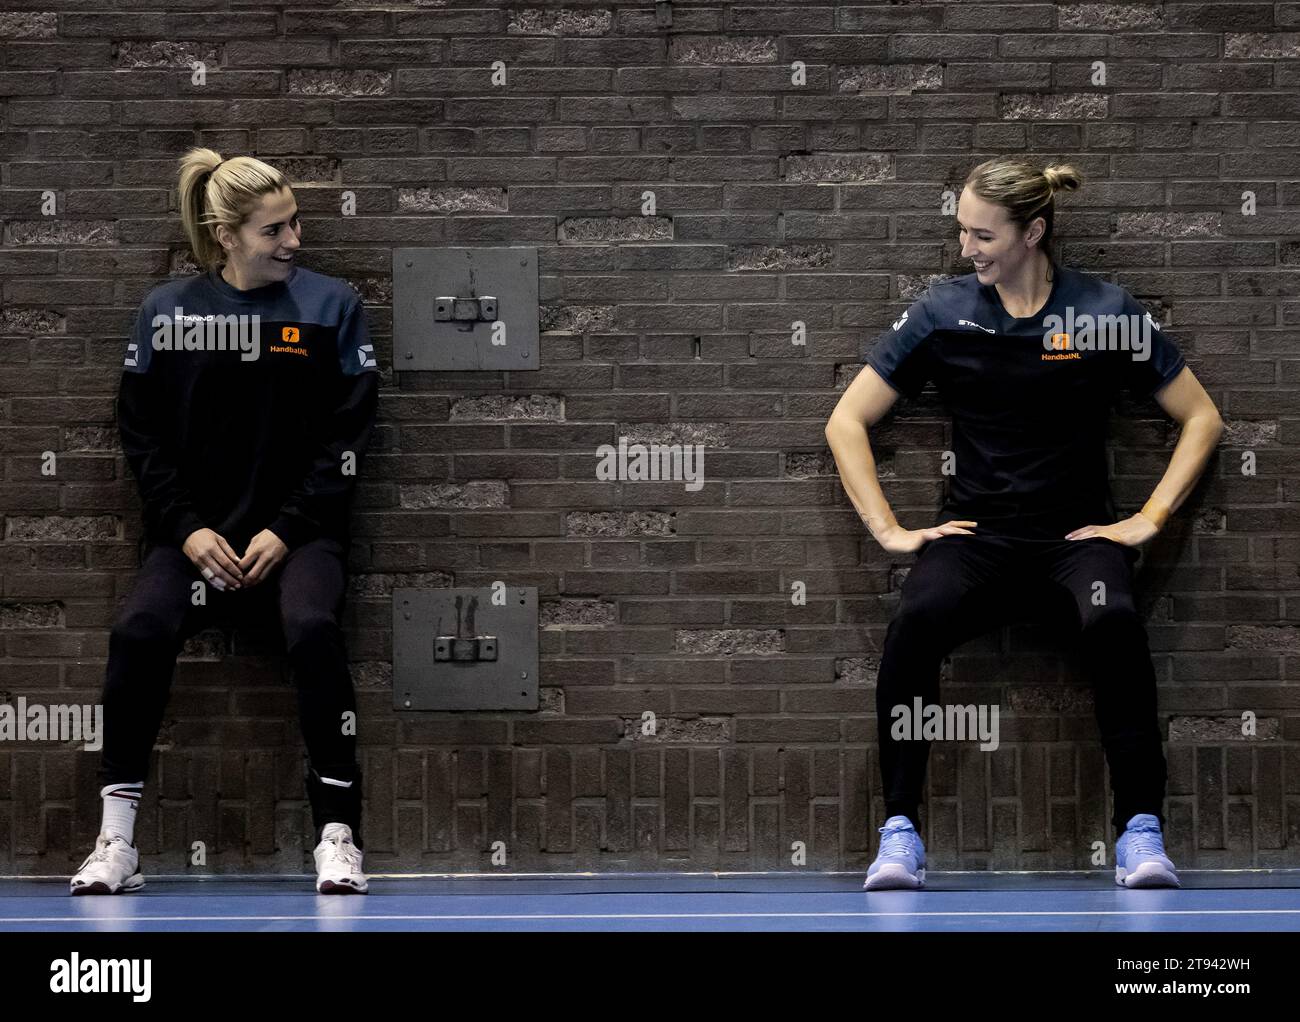 ARNHEM - Estavana Polman and Lois Abbingh during the training of the women's handball team for the World Cup. The World Cup is held in Denmark, Norway and Sweden. ANP ROBIN VAN LONKHUIJSEN Stock Photo